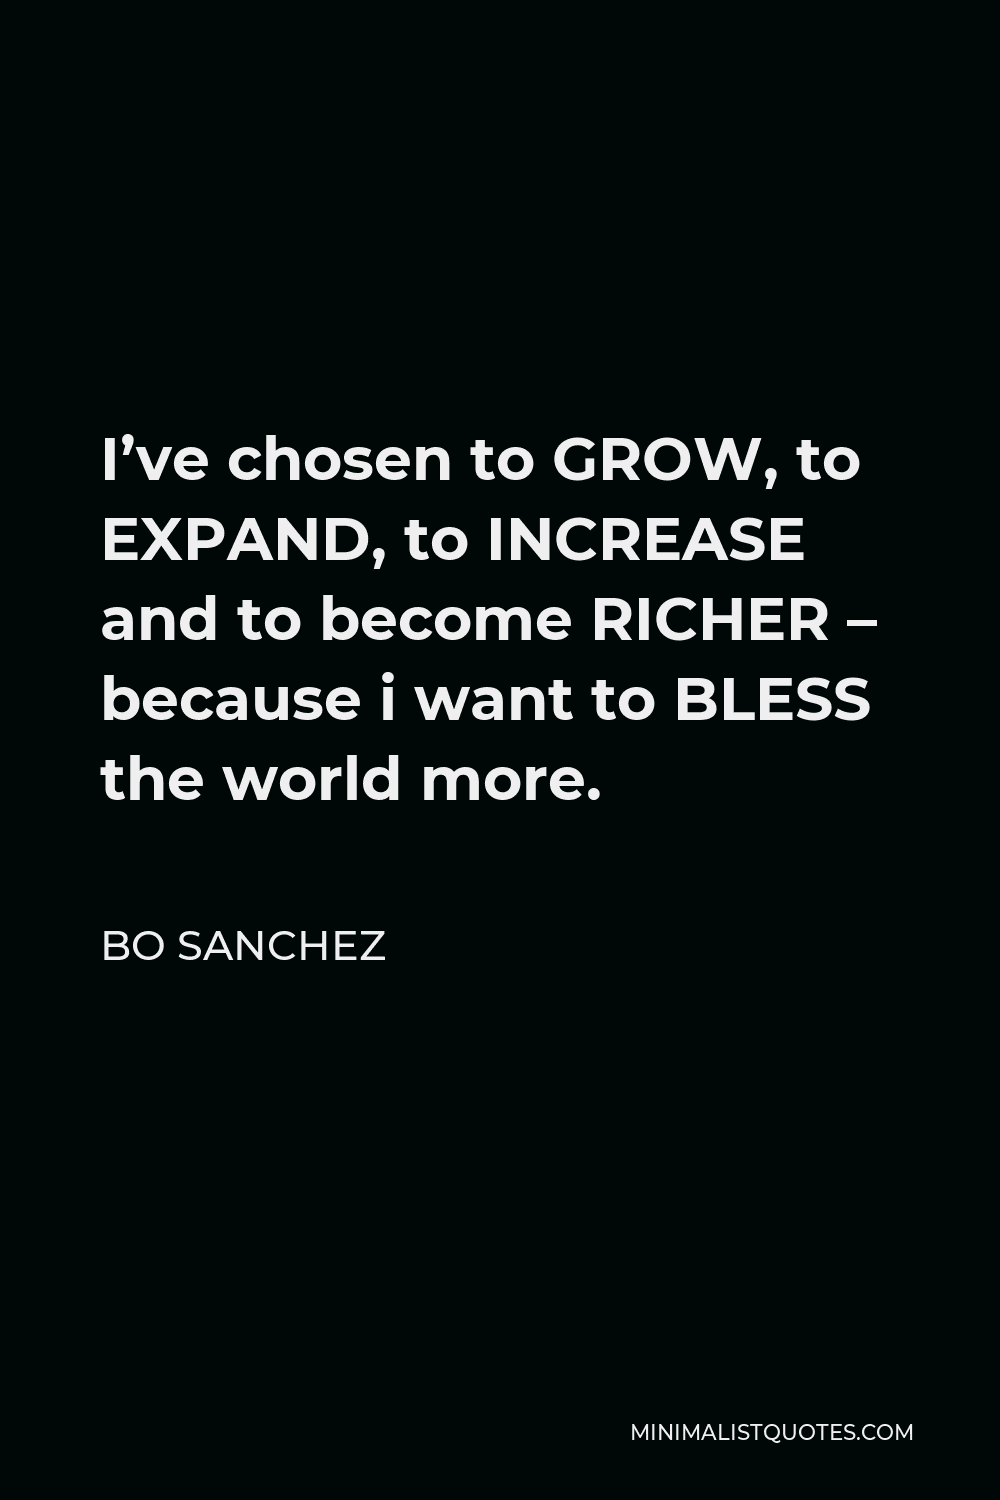 Bo Sanchez Quote - I’ve chosen to GROW, to EXPAND, to INCREASE and to become RICHER – because i want to BLESS the world more.